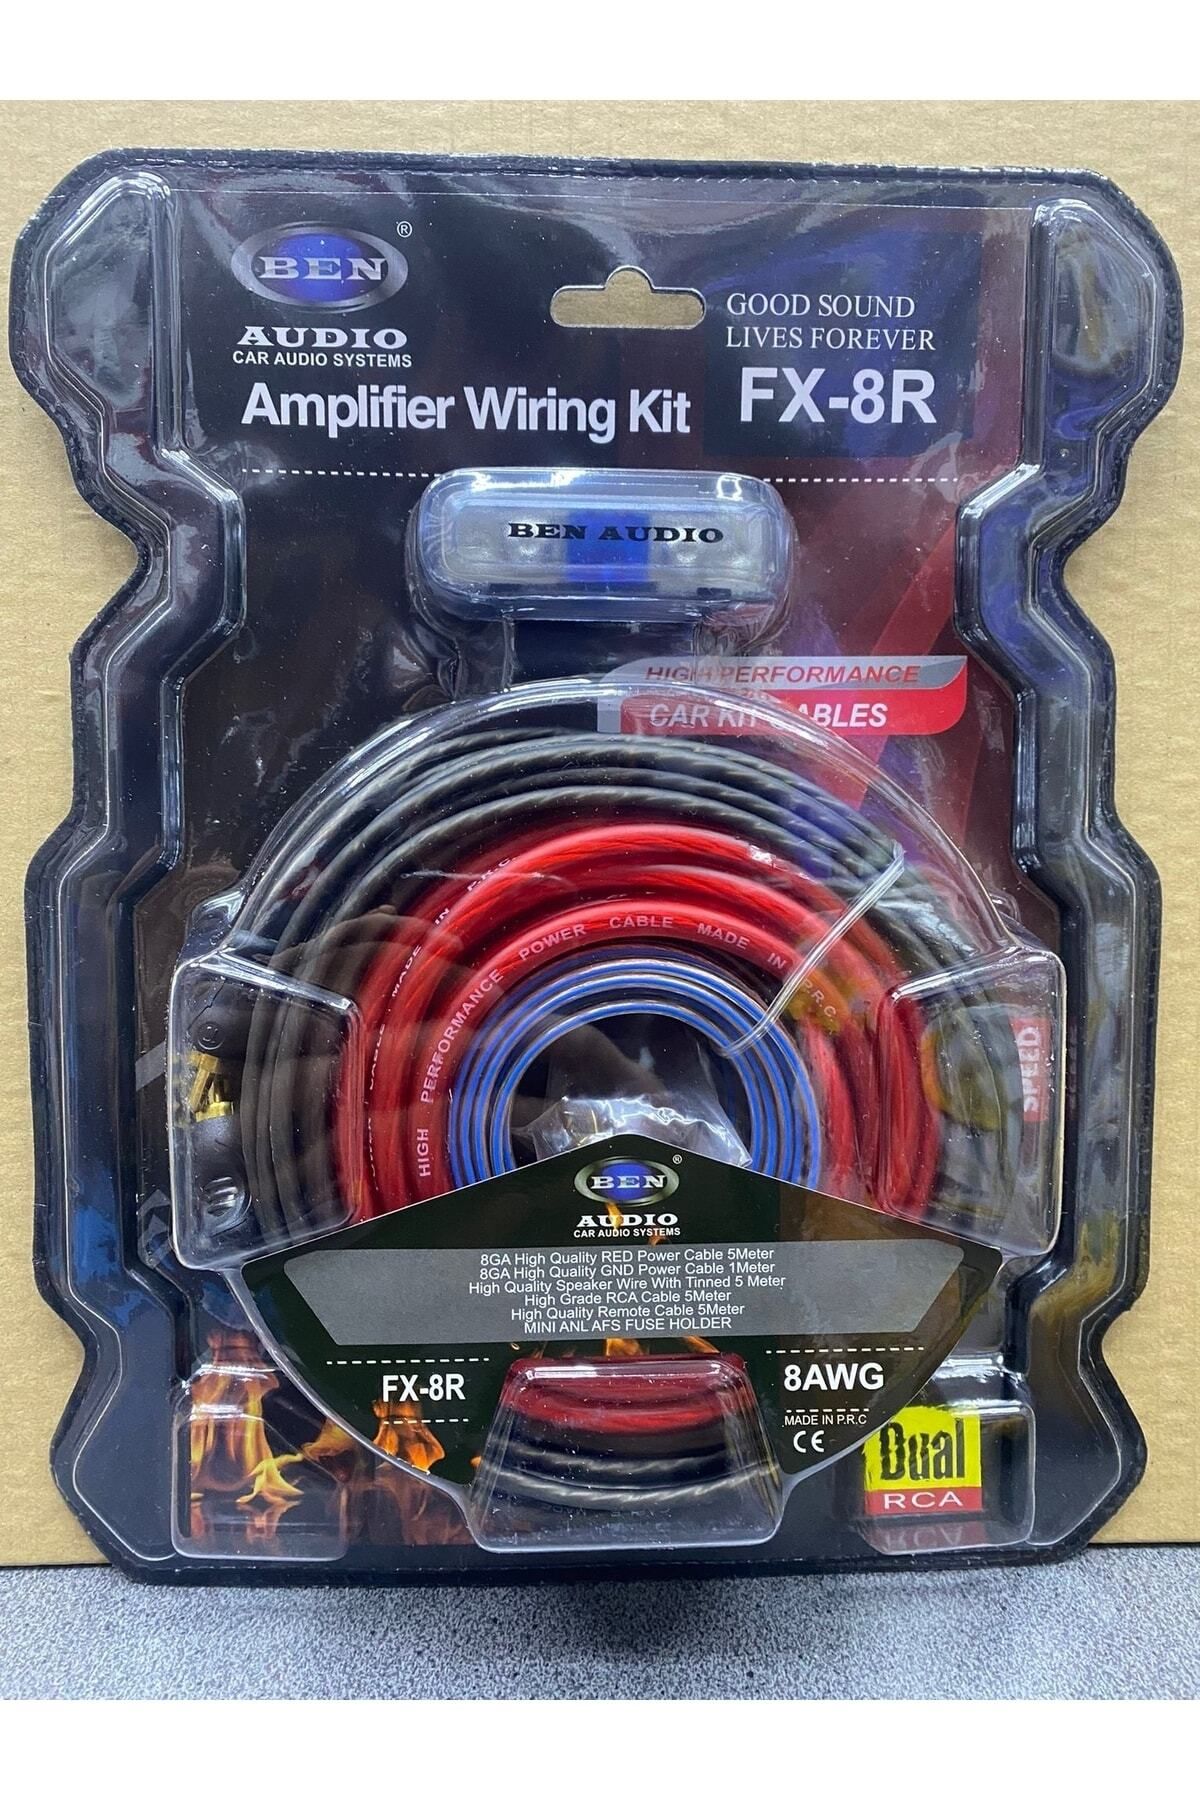 Audiomax Bm Audio 8awg Cable Set Installation Cable Set This Set is the  Necessary Cable for Your Car Audio Installation - Trendyol